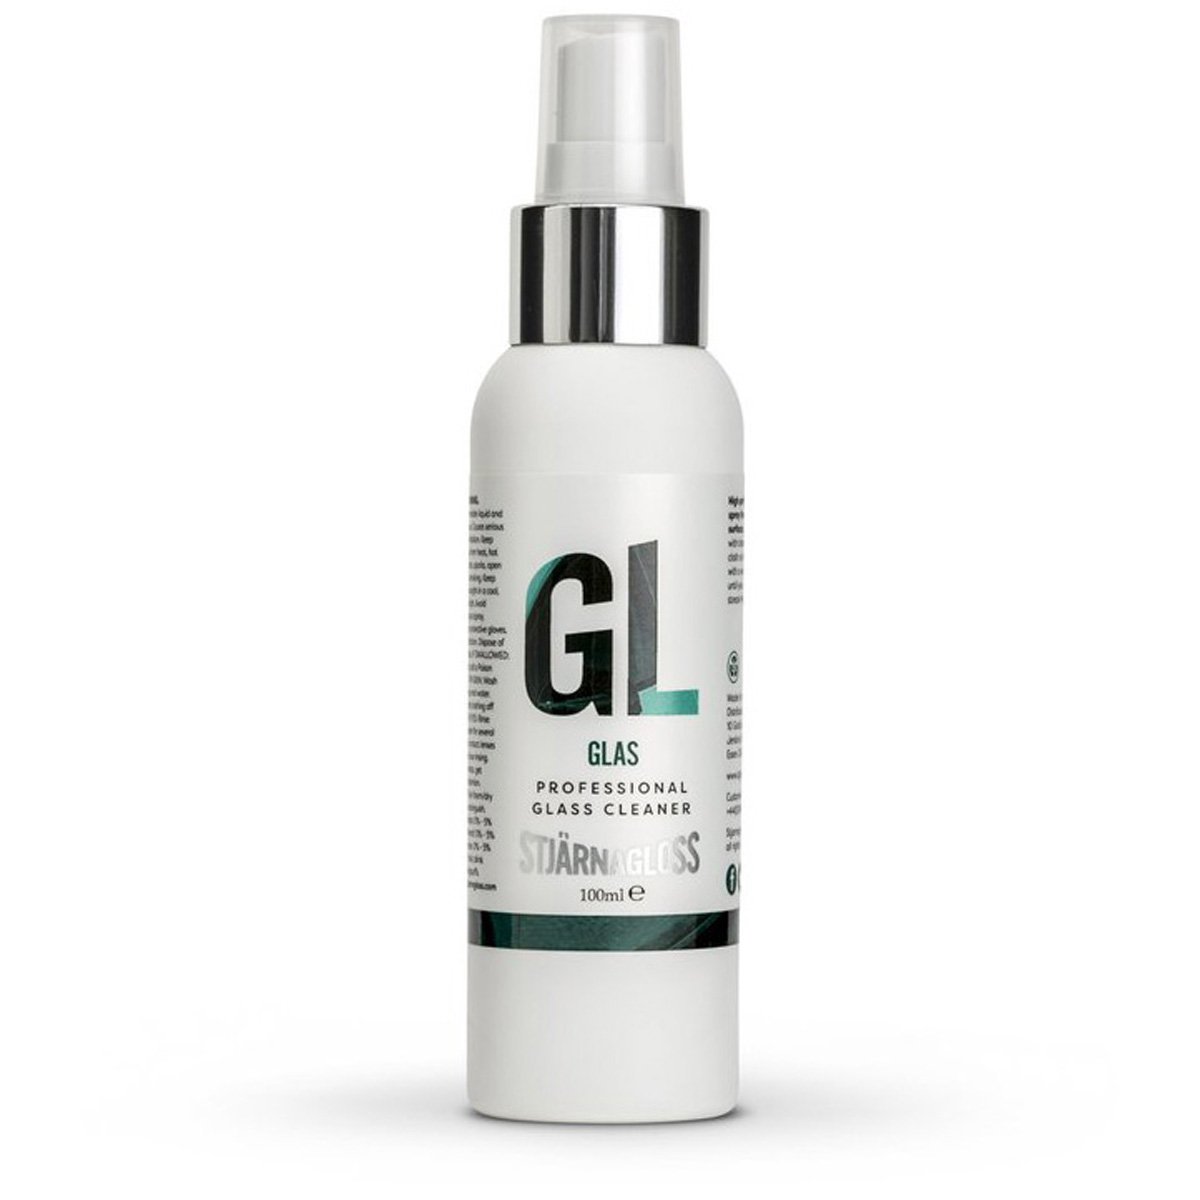 Glas Professional Glass Cleaner-100ml